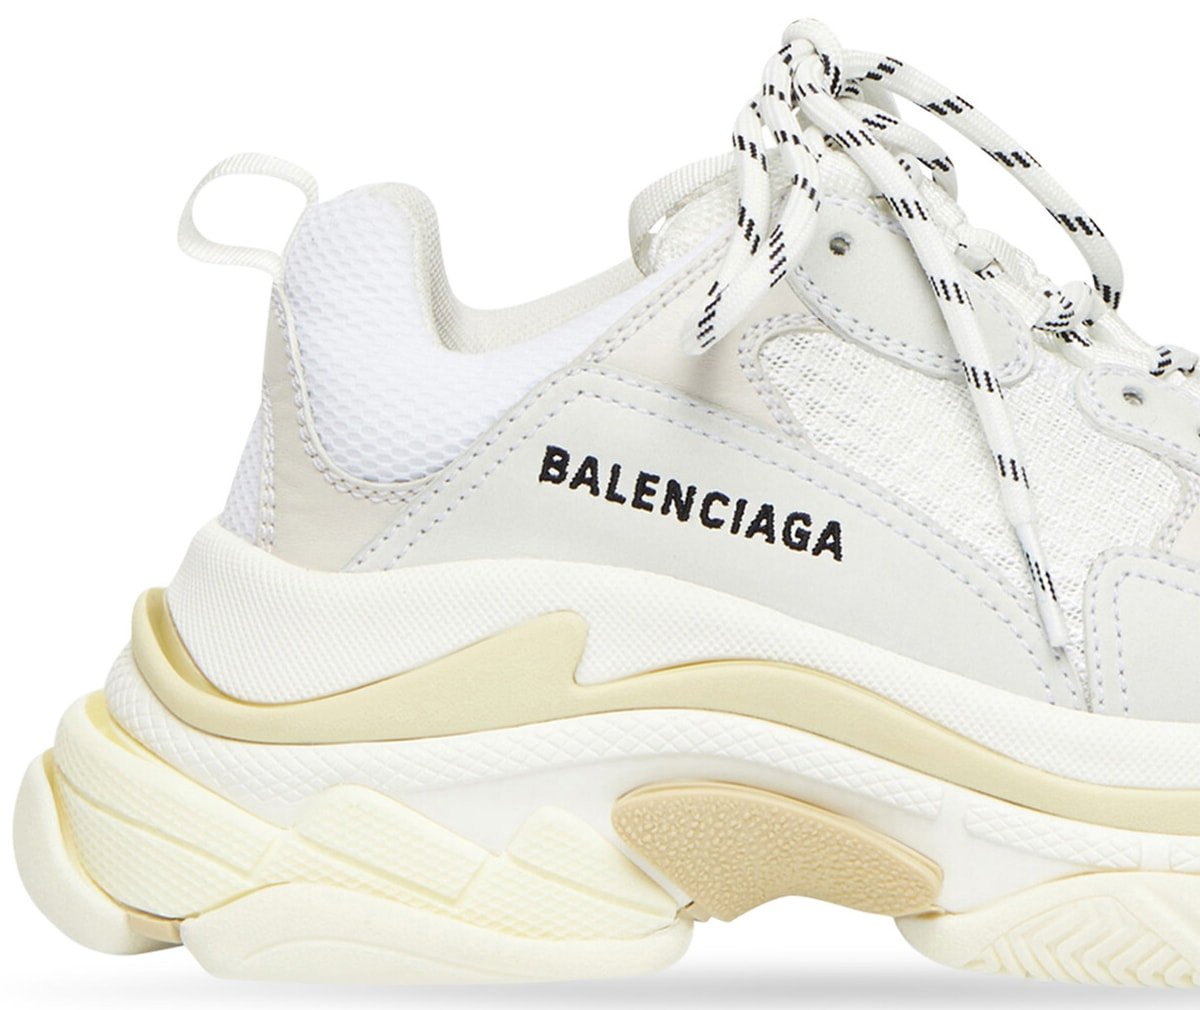 Balenciaga shoes usually have logo embroidery/embossing on the side